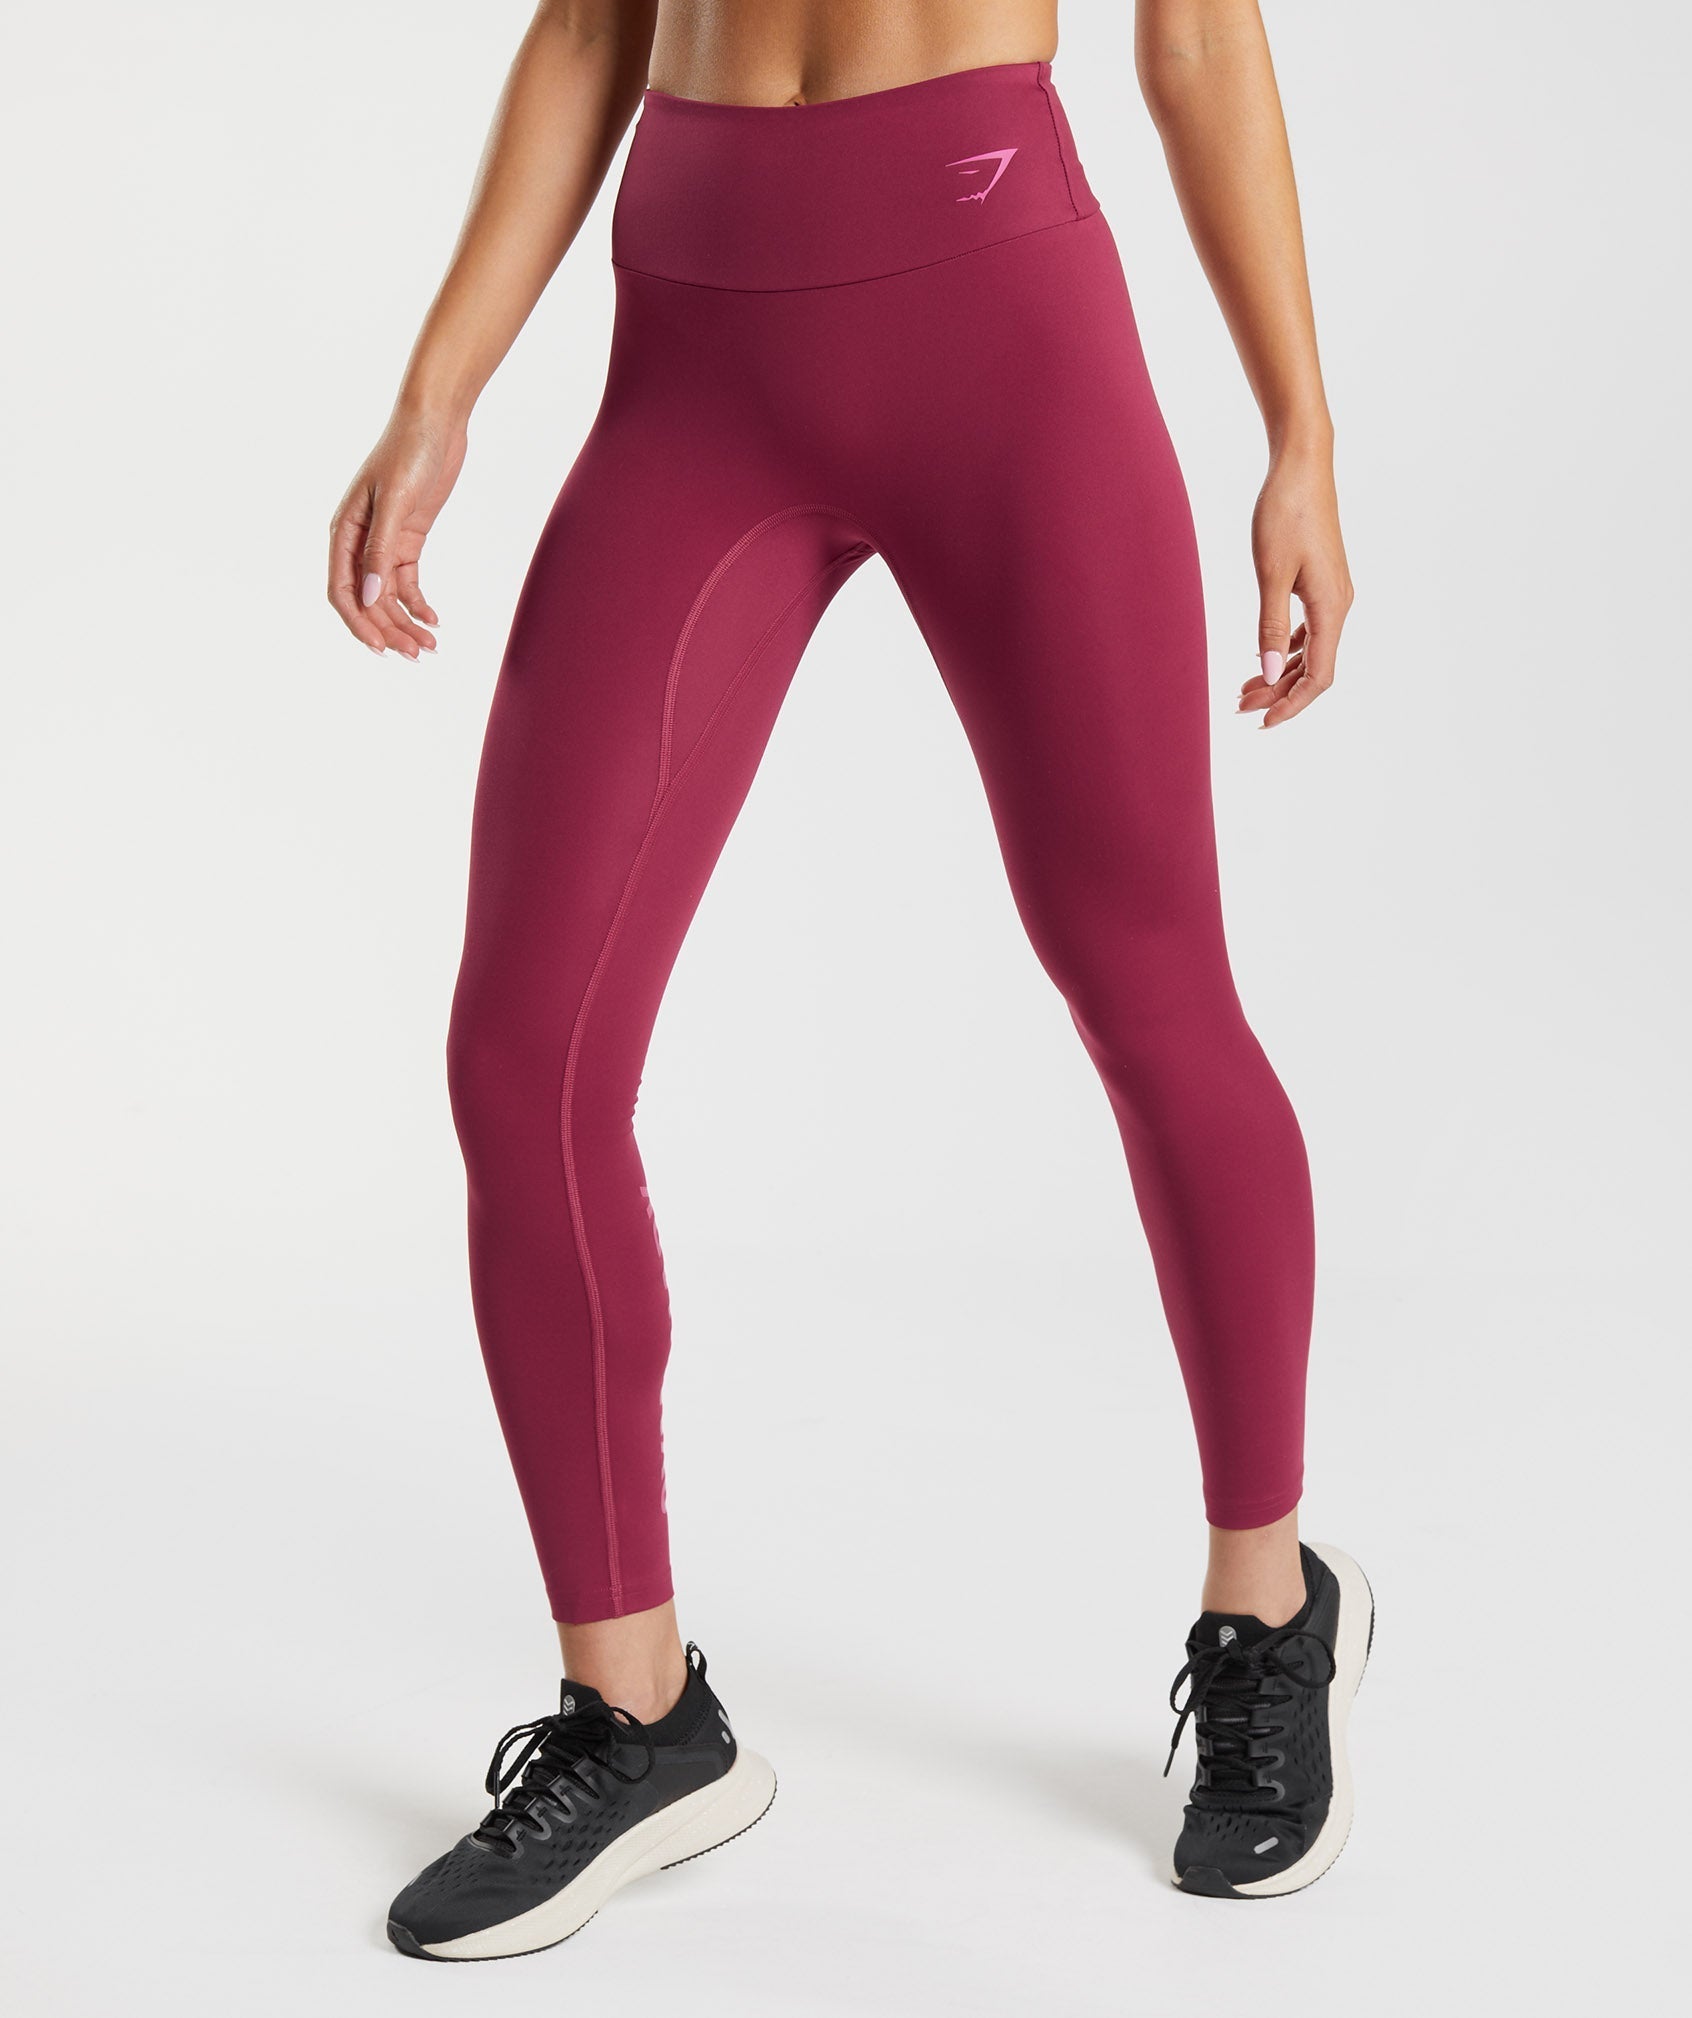 Graphics Fraction Leggings in Currant Pink - view 2